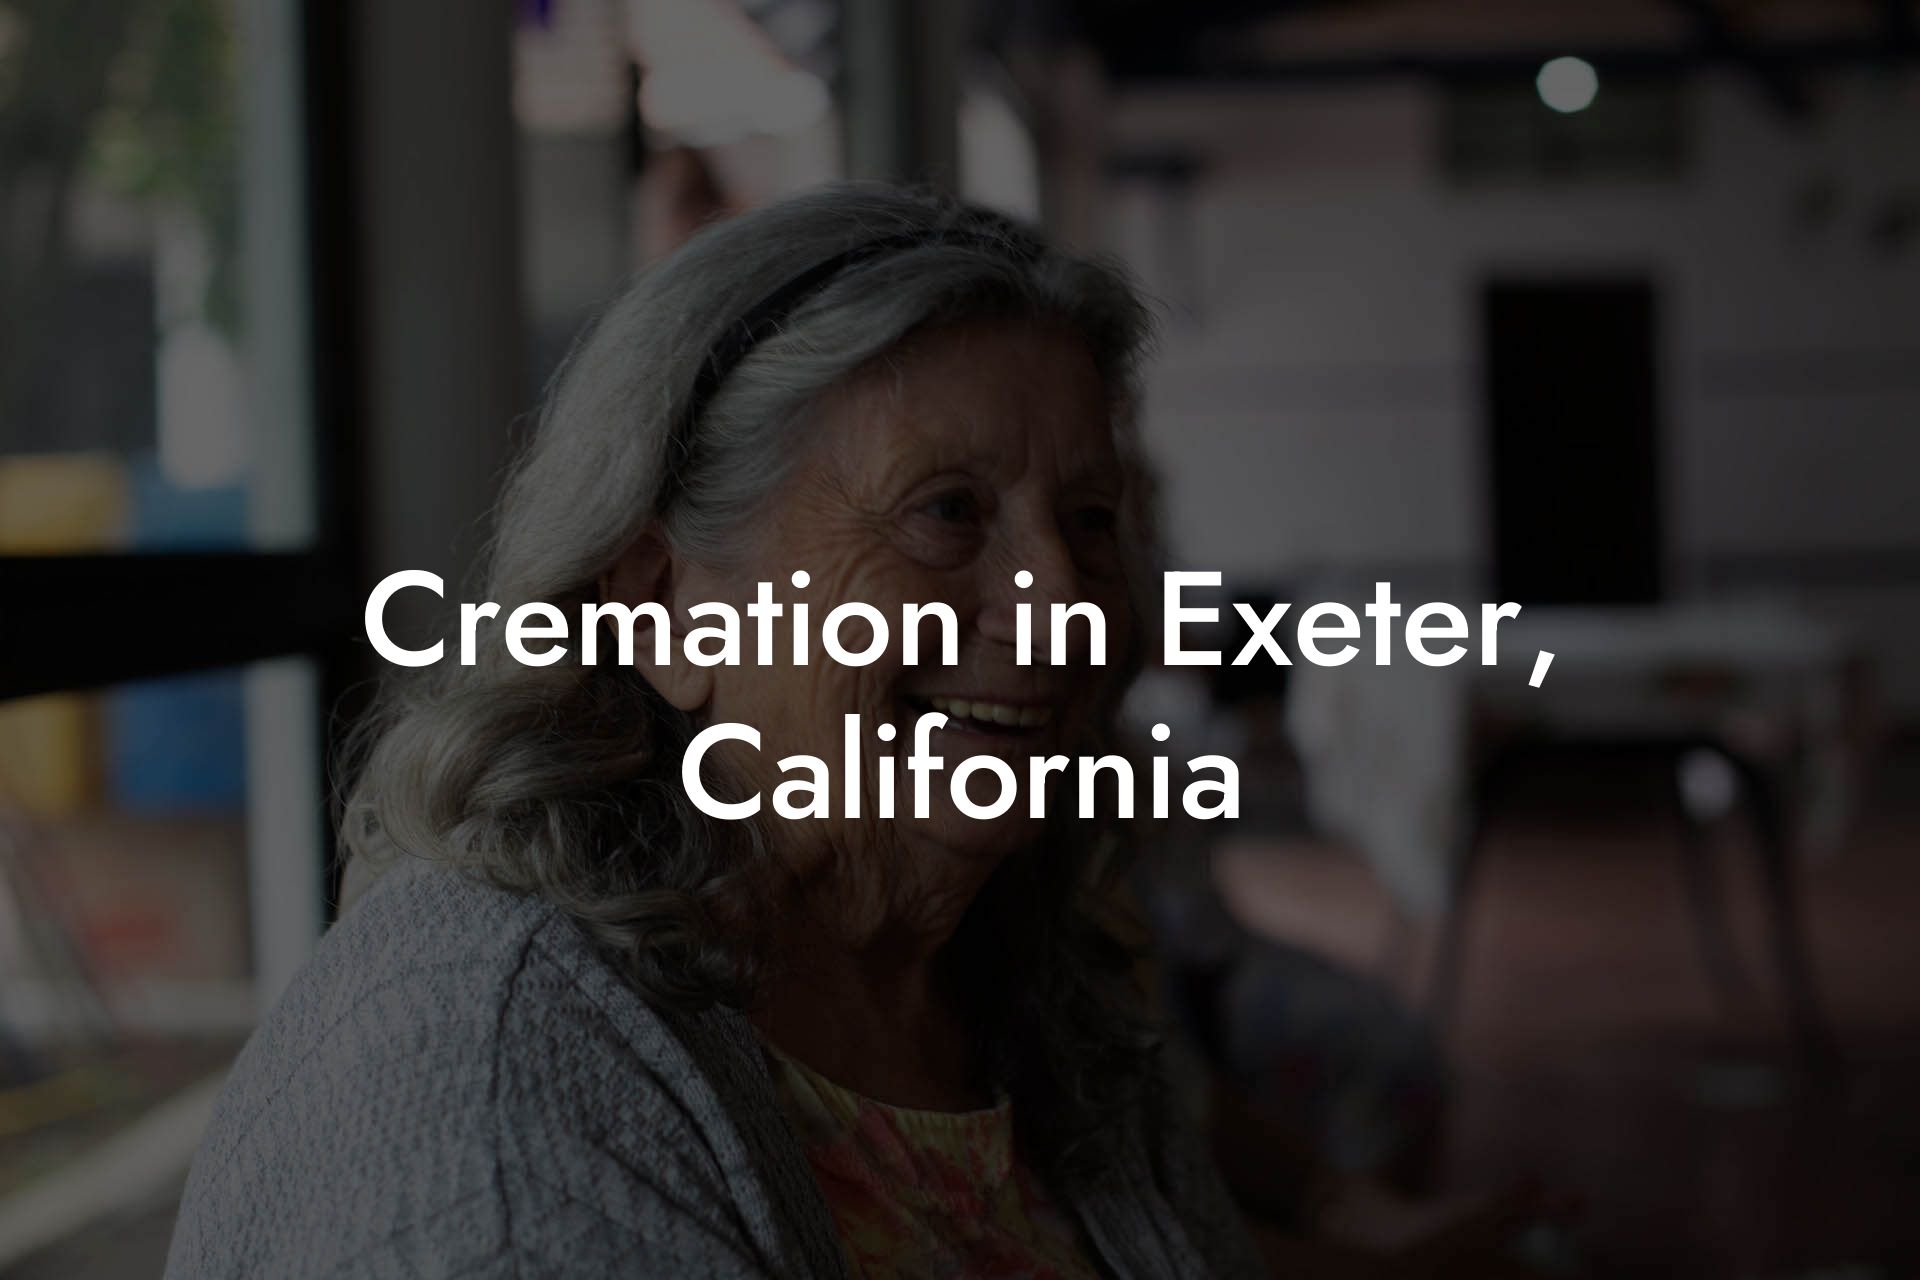 Cremation in Exeter, California